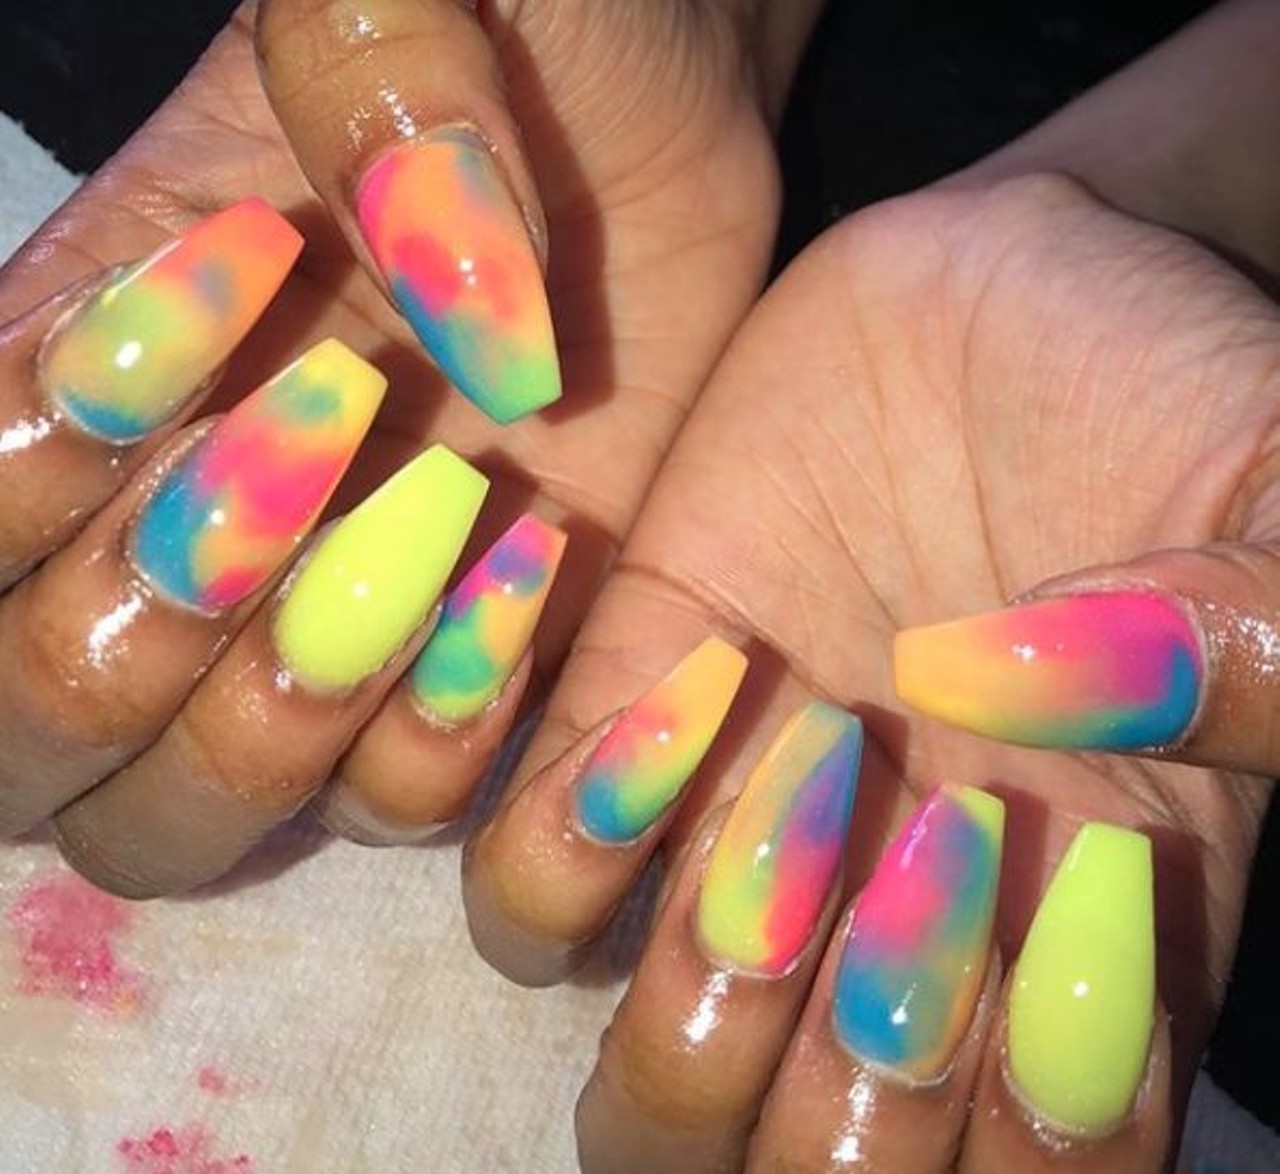  nailsby.madison_
Snapchat: mvdisonn
Madison is a mother, nail artist and licensed cosmetologist who can do some crazy things with acrylics.
Photo via nailsby.madison_/Instagram